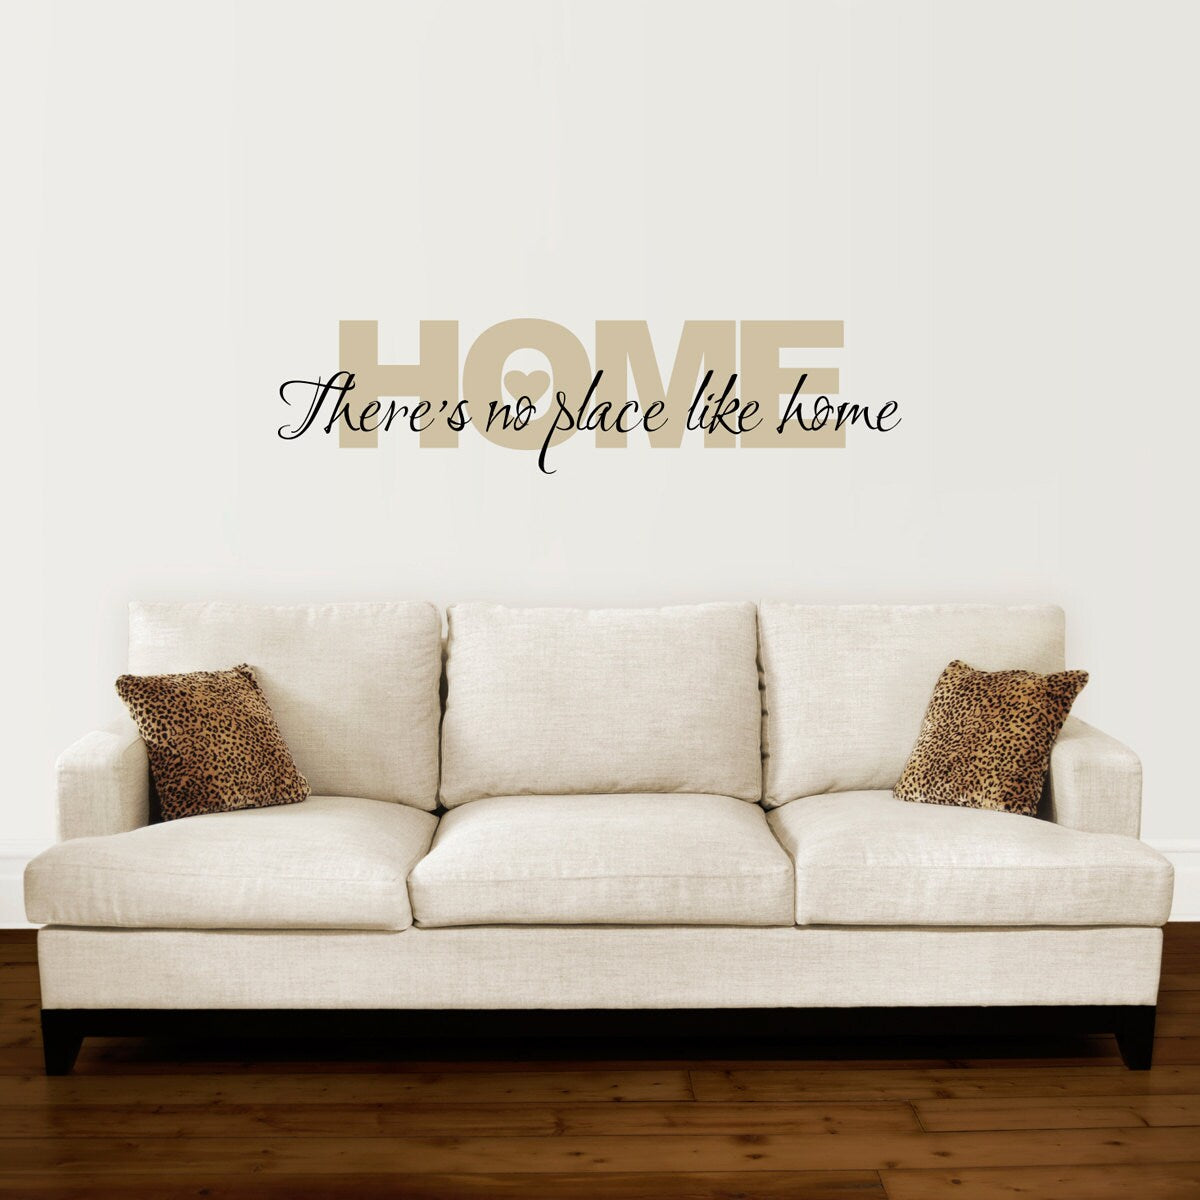 Home Decal - There's no place like Home Wall Decal Quote - Large 2 color